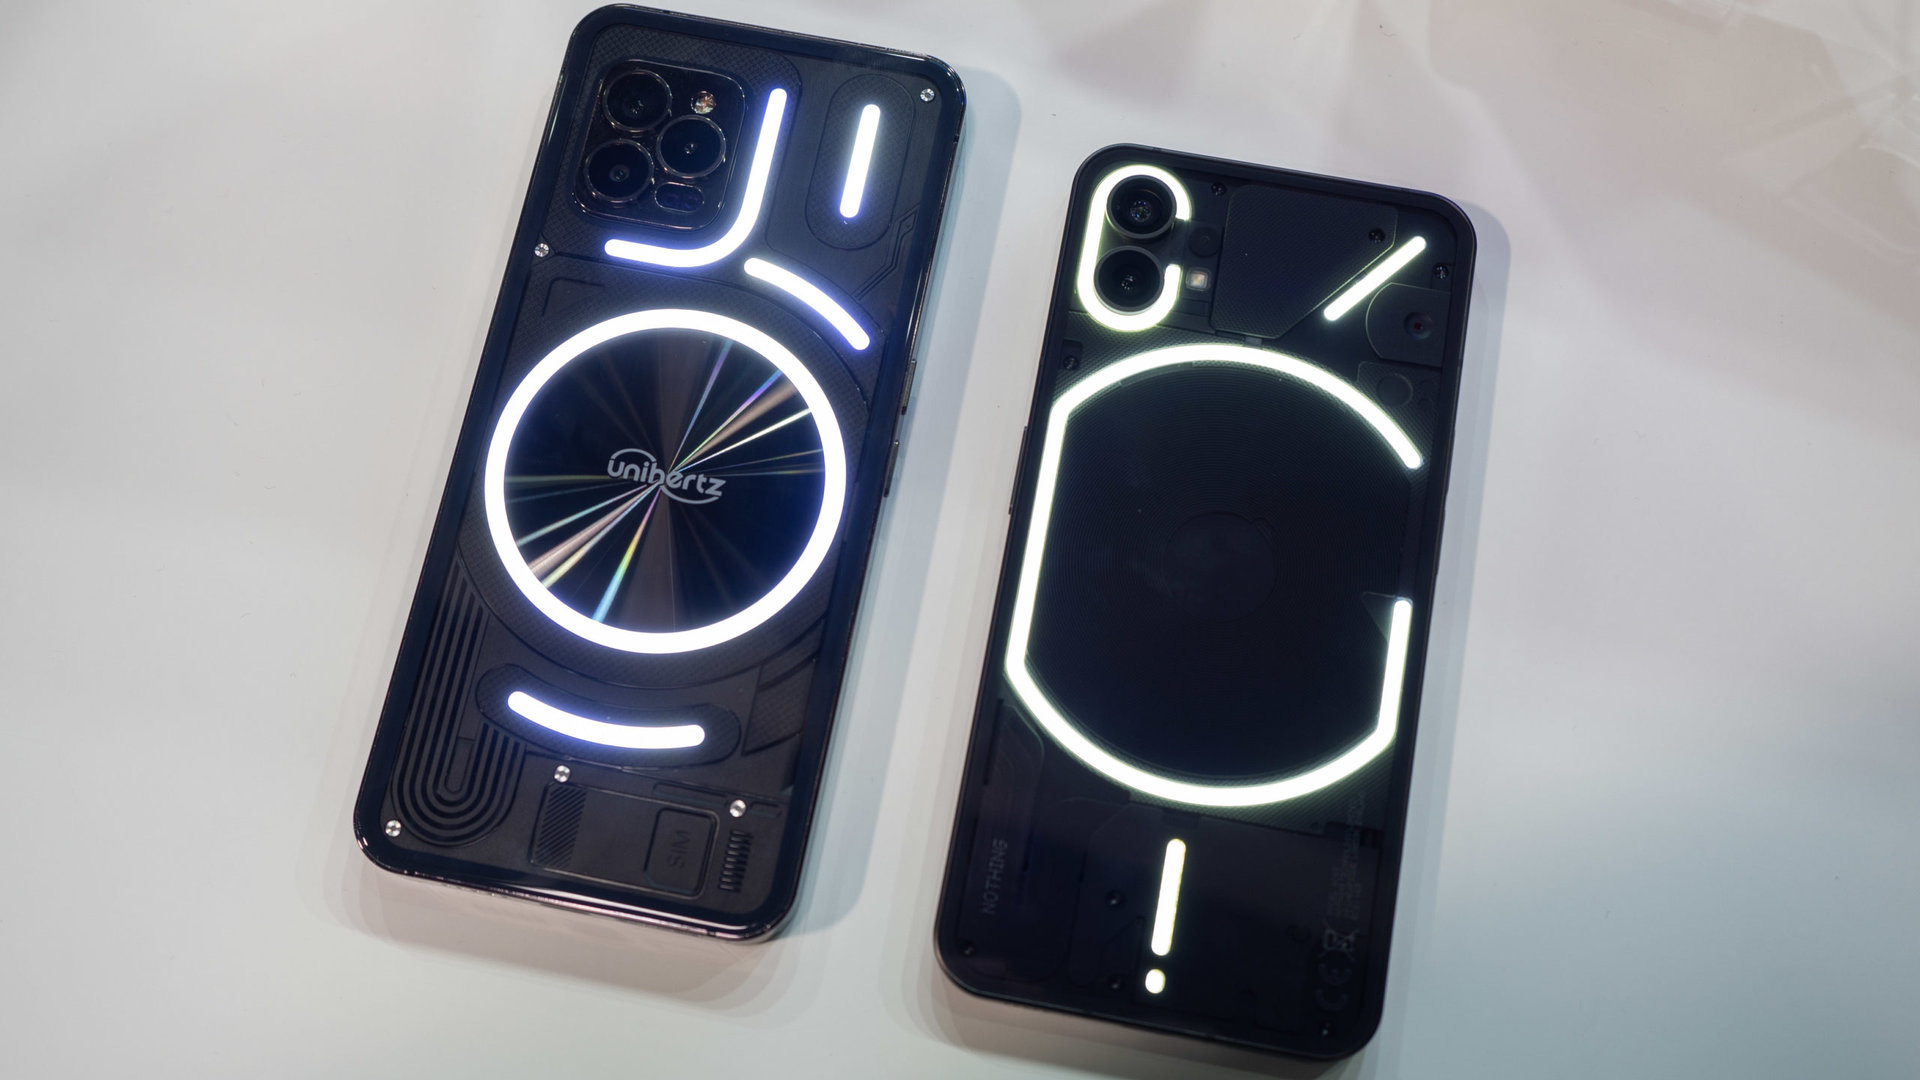 Black Unihertz Luna phone, from the back, with white lights, next to a Nothing Phone 1